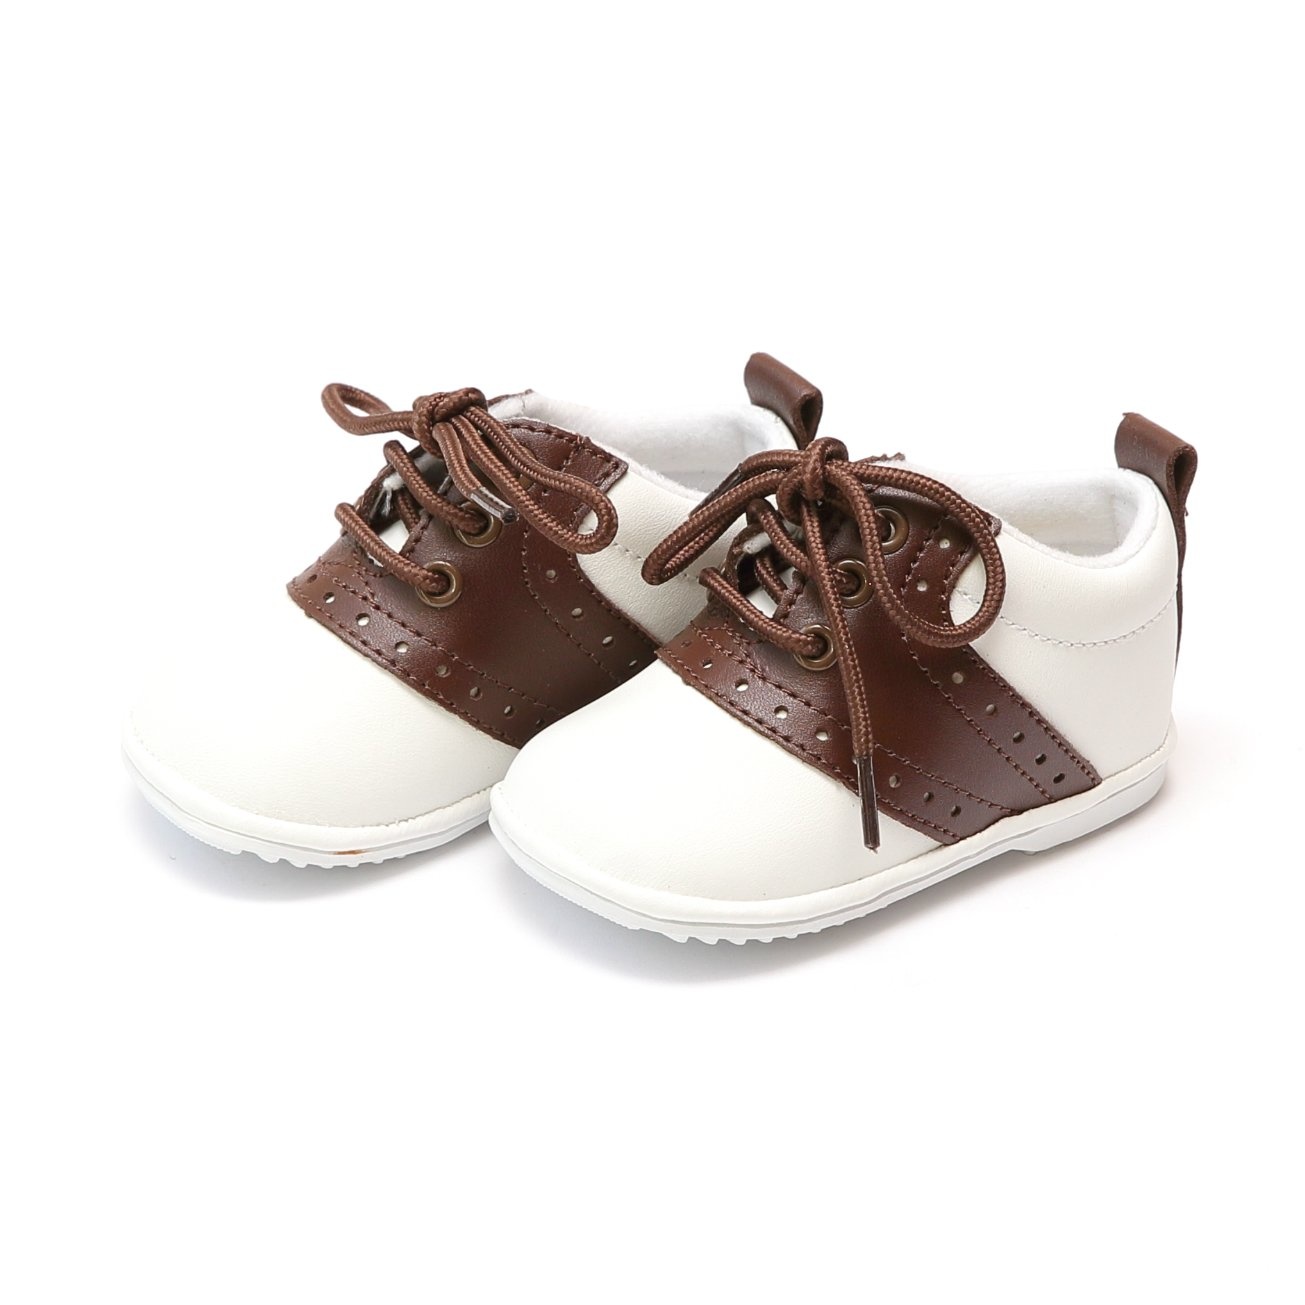 Traditional Baby Shoe - Polliwogs 